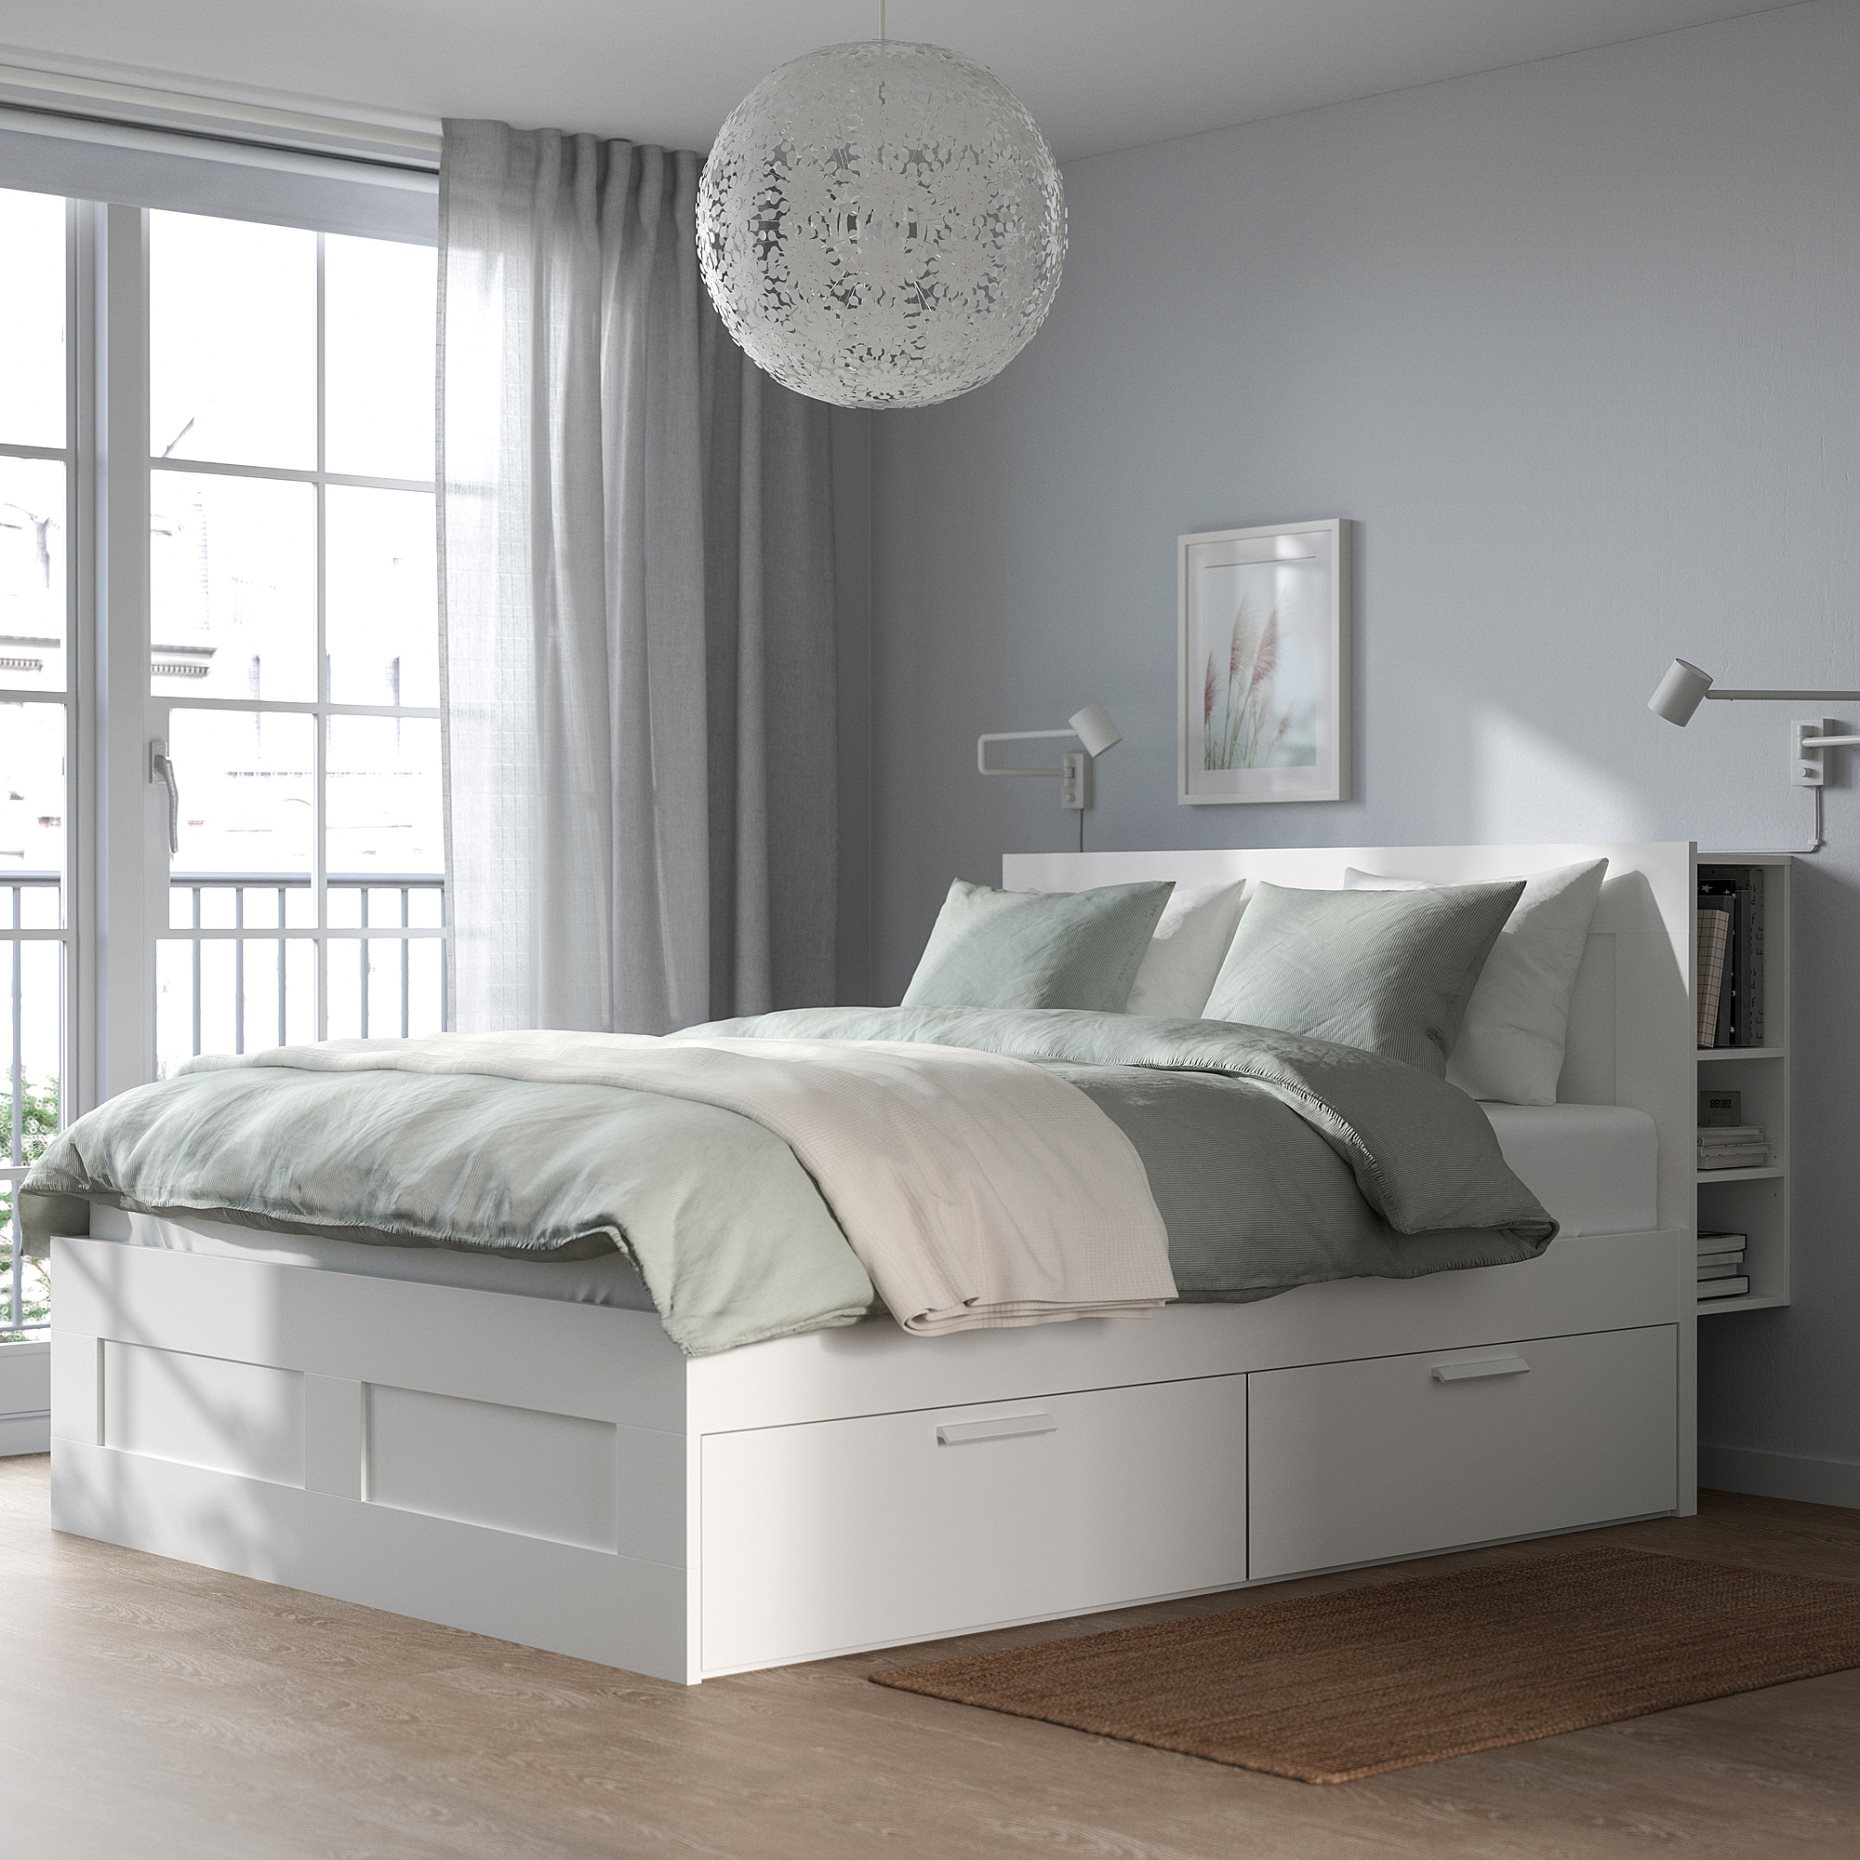 BRIMNES, bed frame with storage and headboard, 160X200 cm, 891.574.55